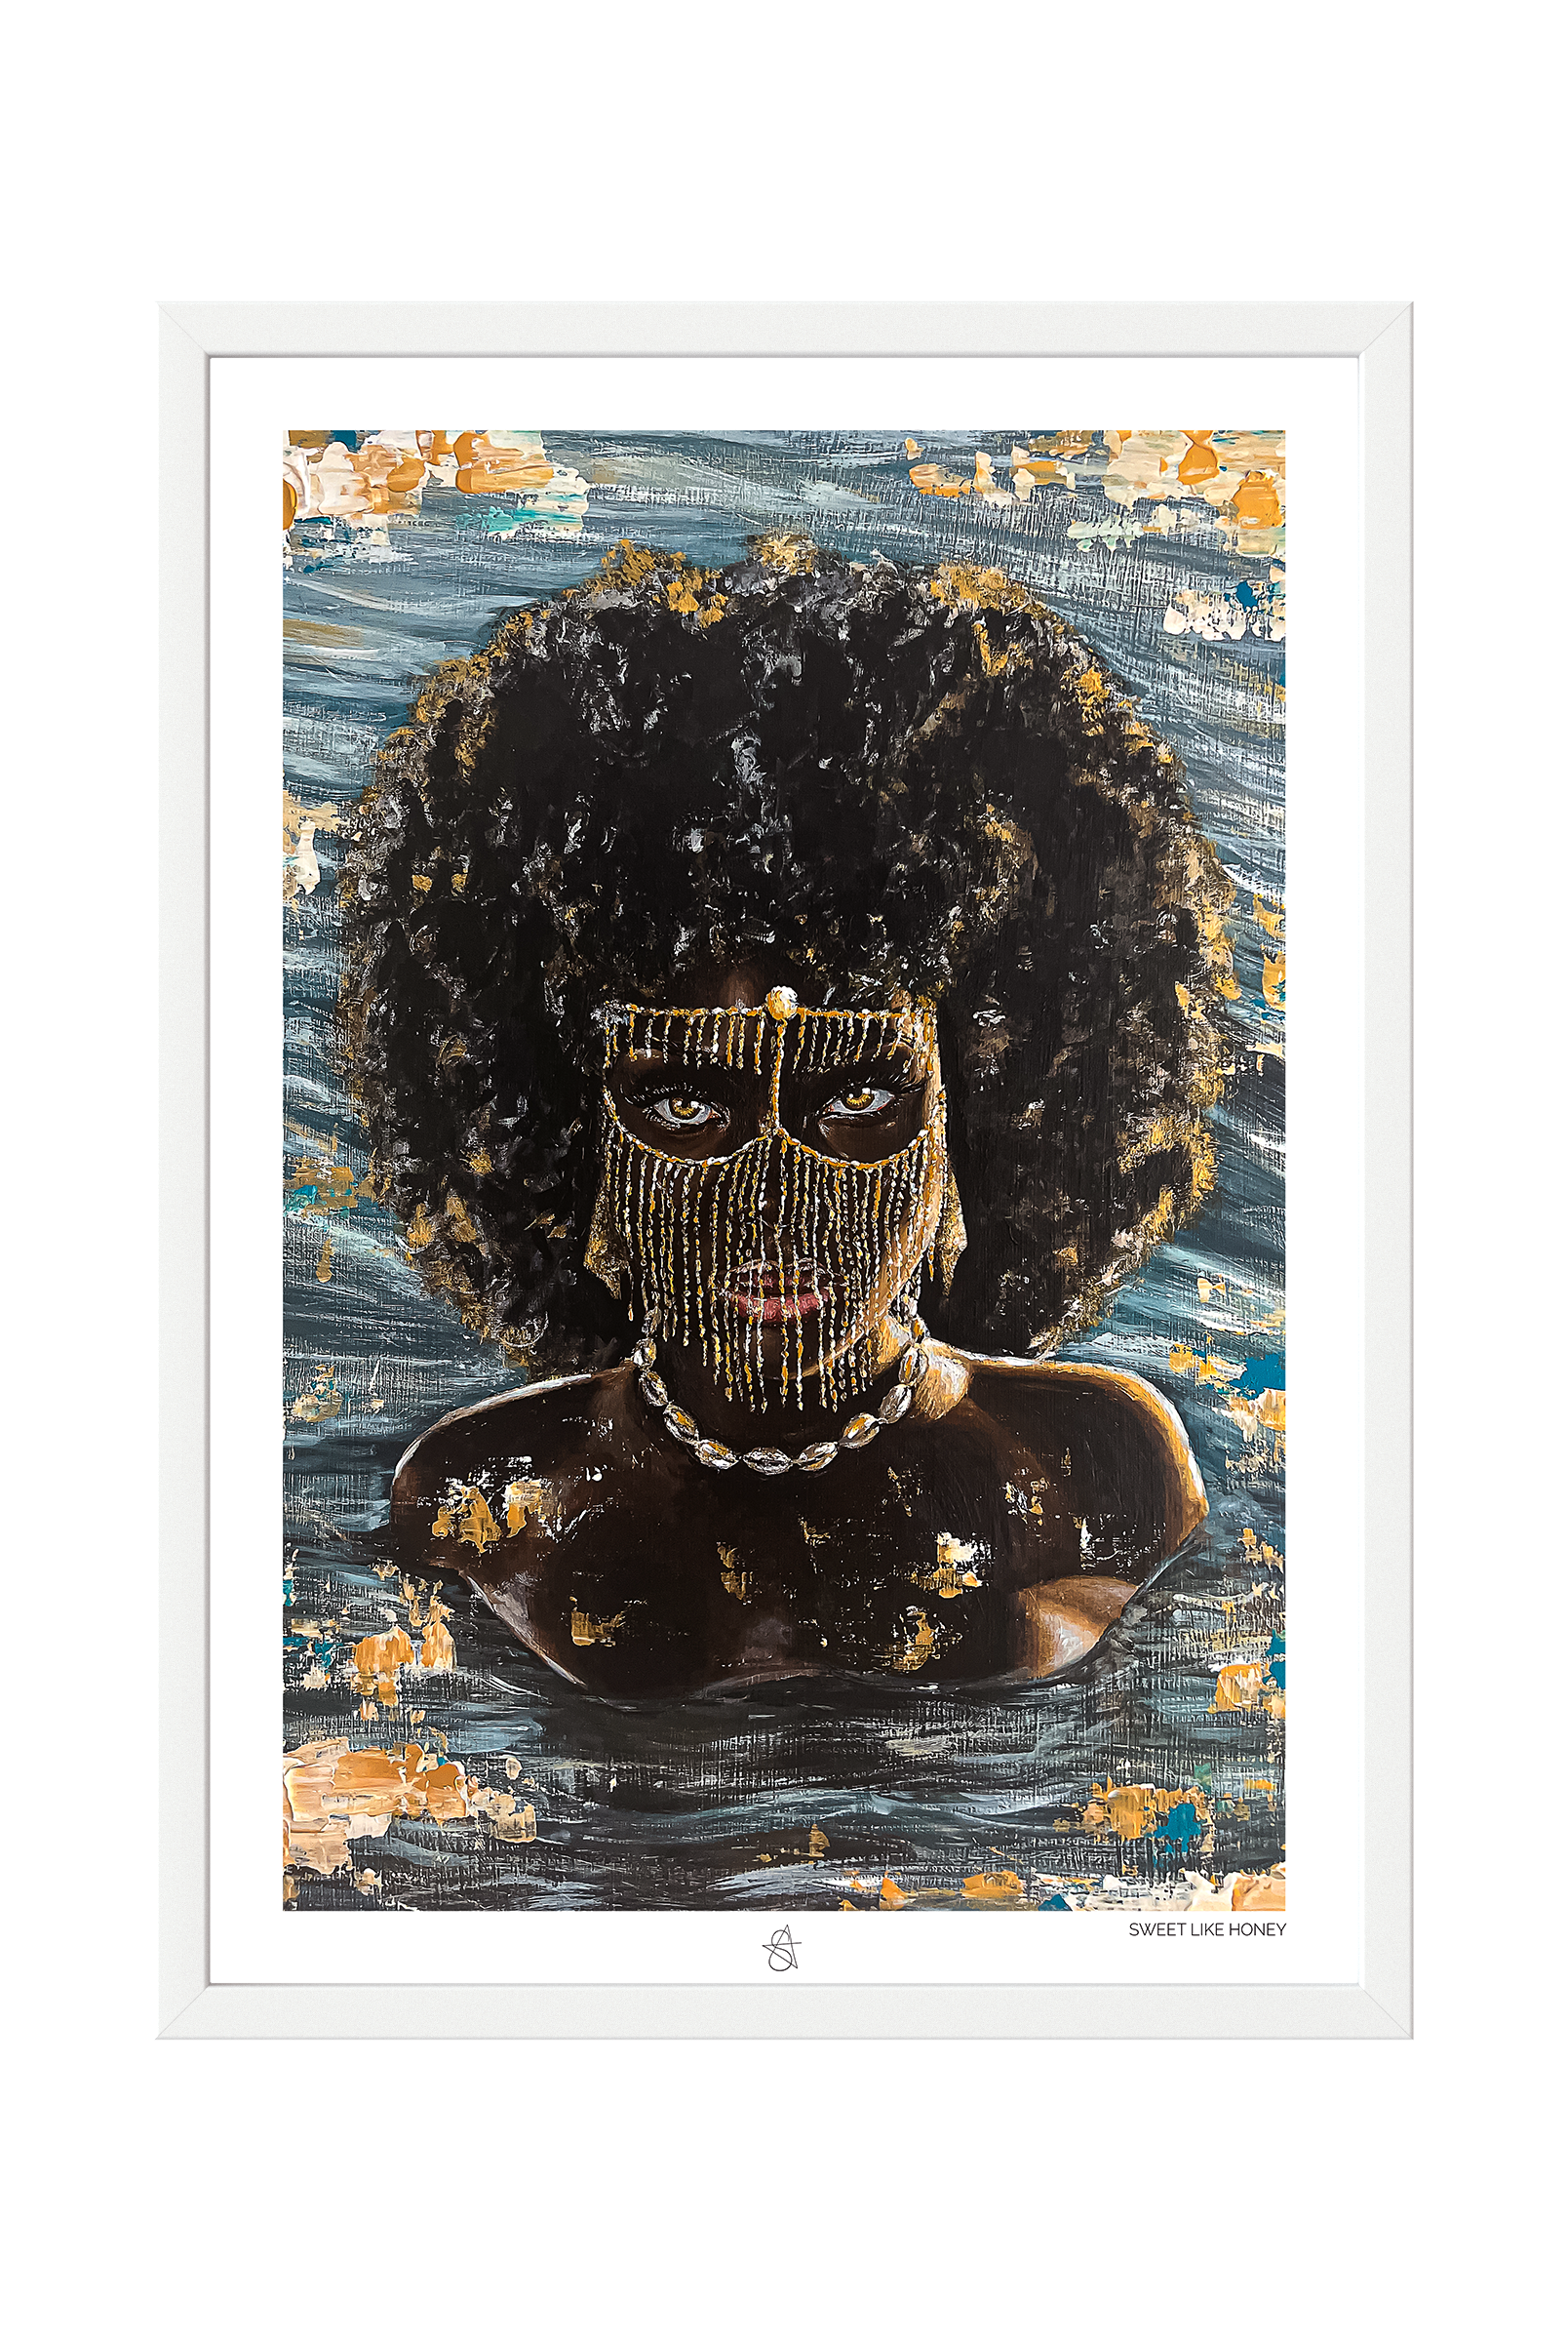 Osun Art Print on high-quality matte or velvet paper, framed in gallery black, white, or natural maple, depicting Yoruba Orisa of sweet waters and femininity.